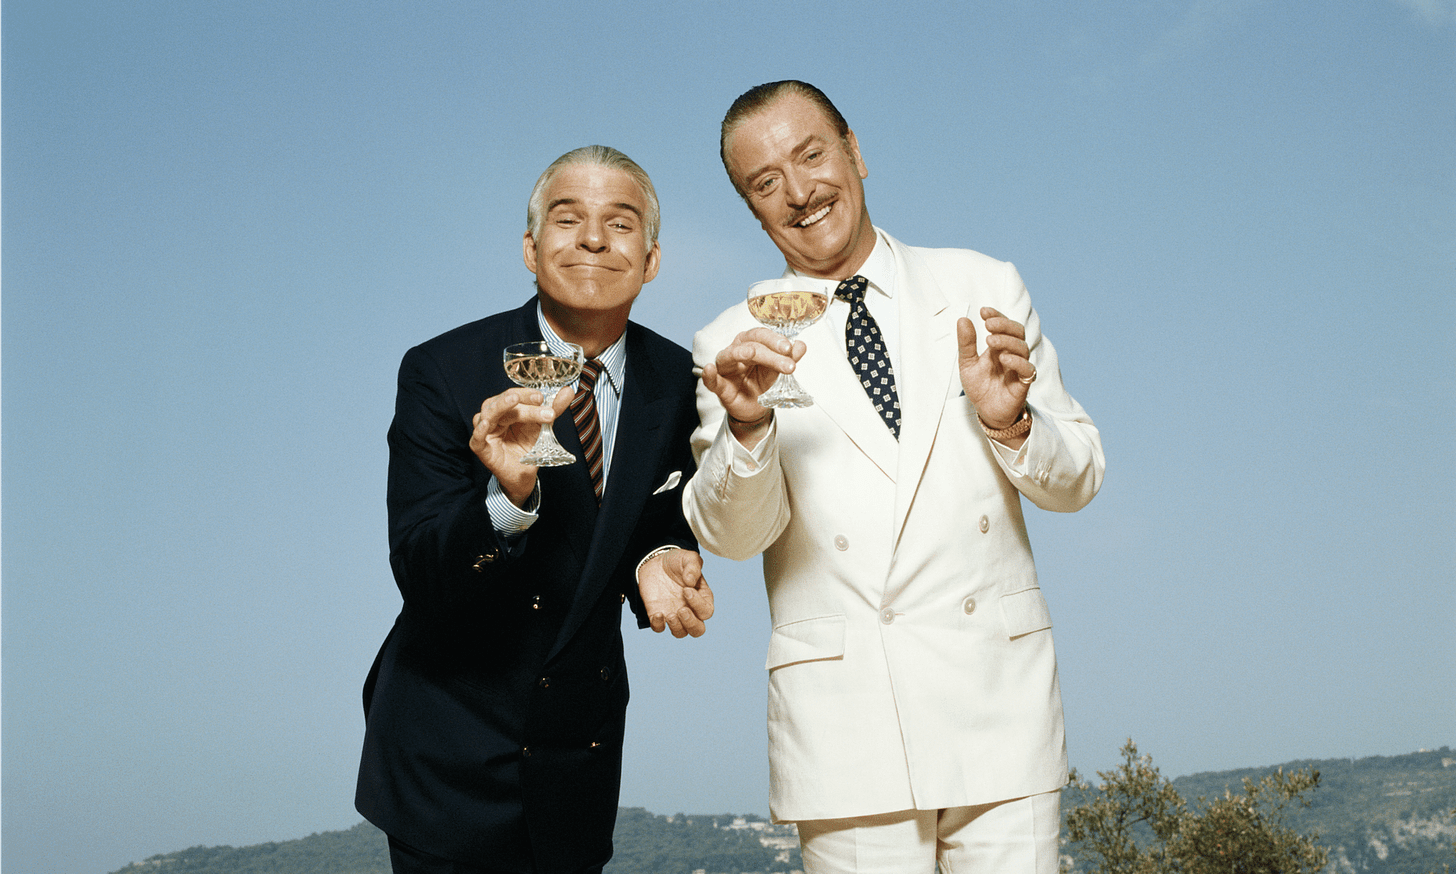 Why Haven't You Watched "Dirty Rotten Scoundrels" Yet? | Studio 360 | WNYC